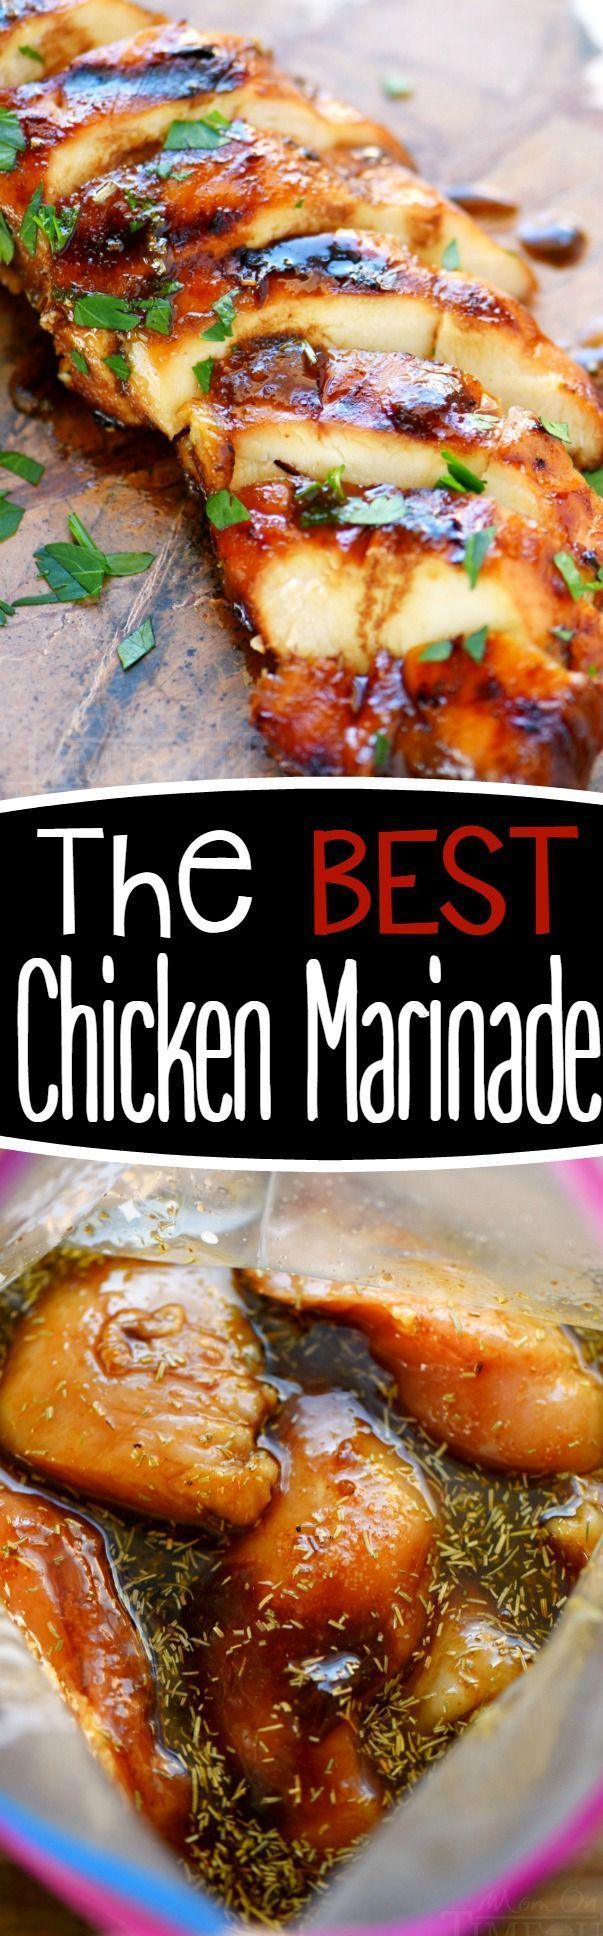 Look no further for the Best Chicken Marinade recipe ever! This easy chicken marinade recipe is going